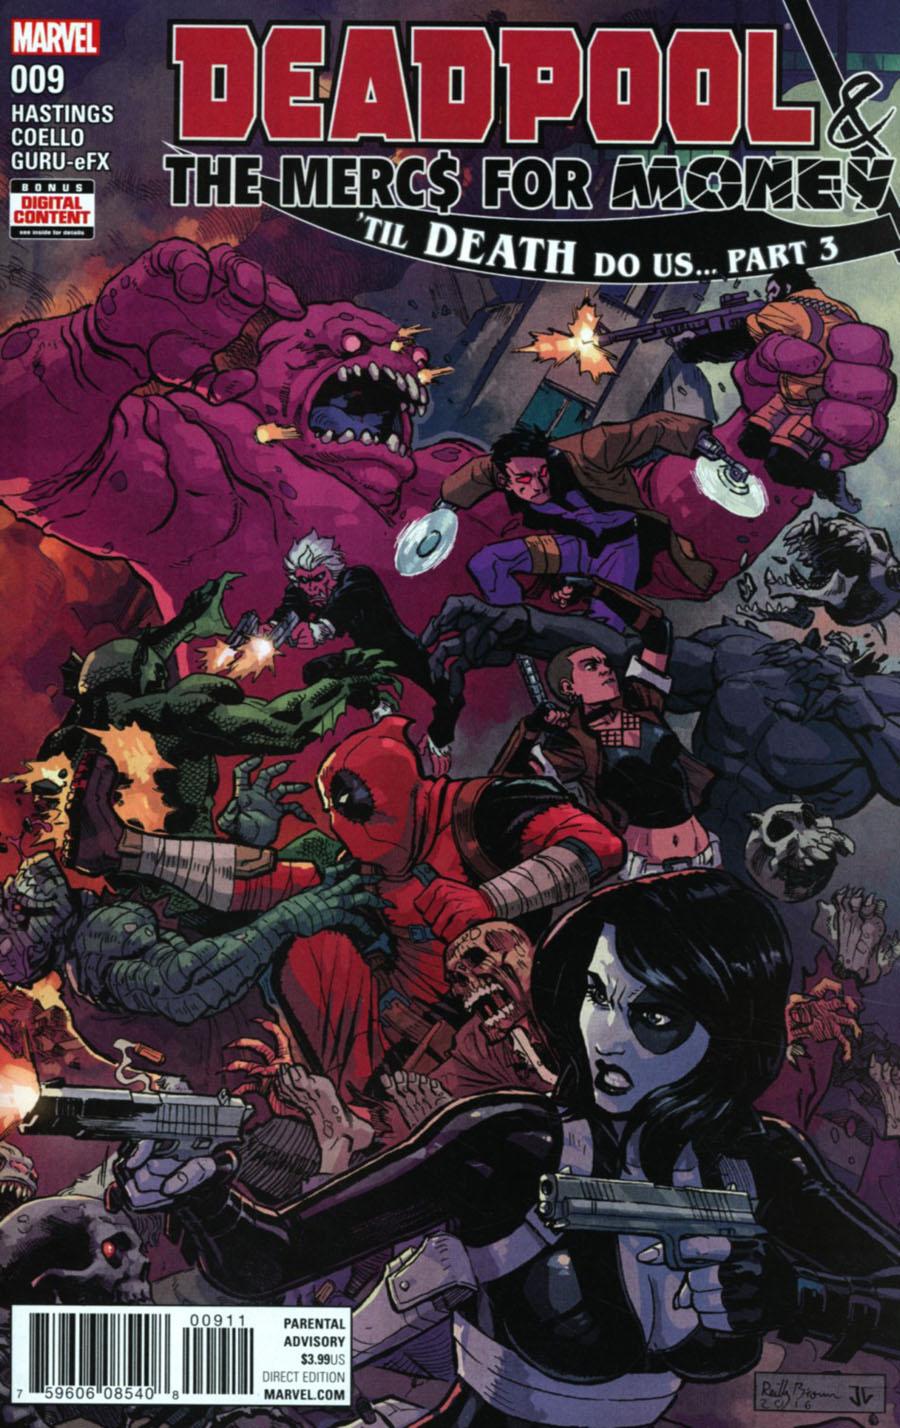 Deadpool And The Mercs For Money Vol. 2 #9